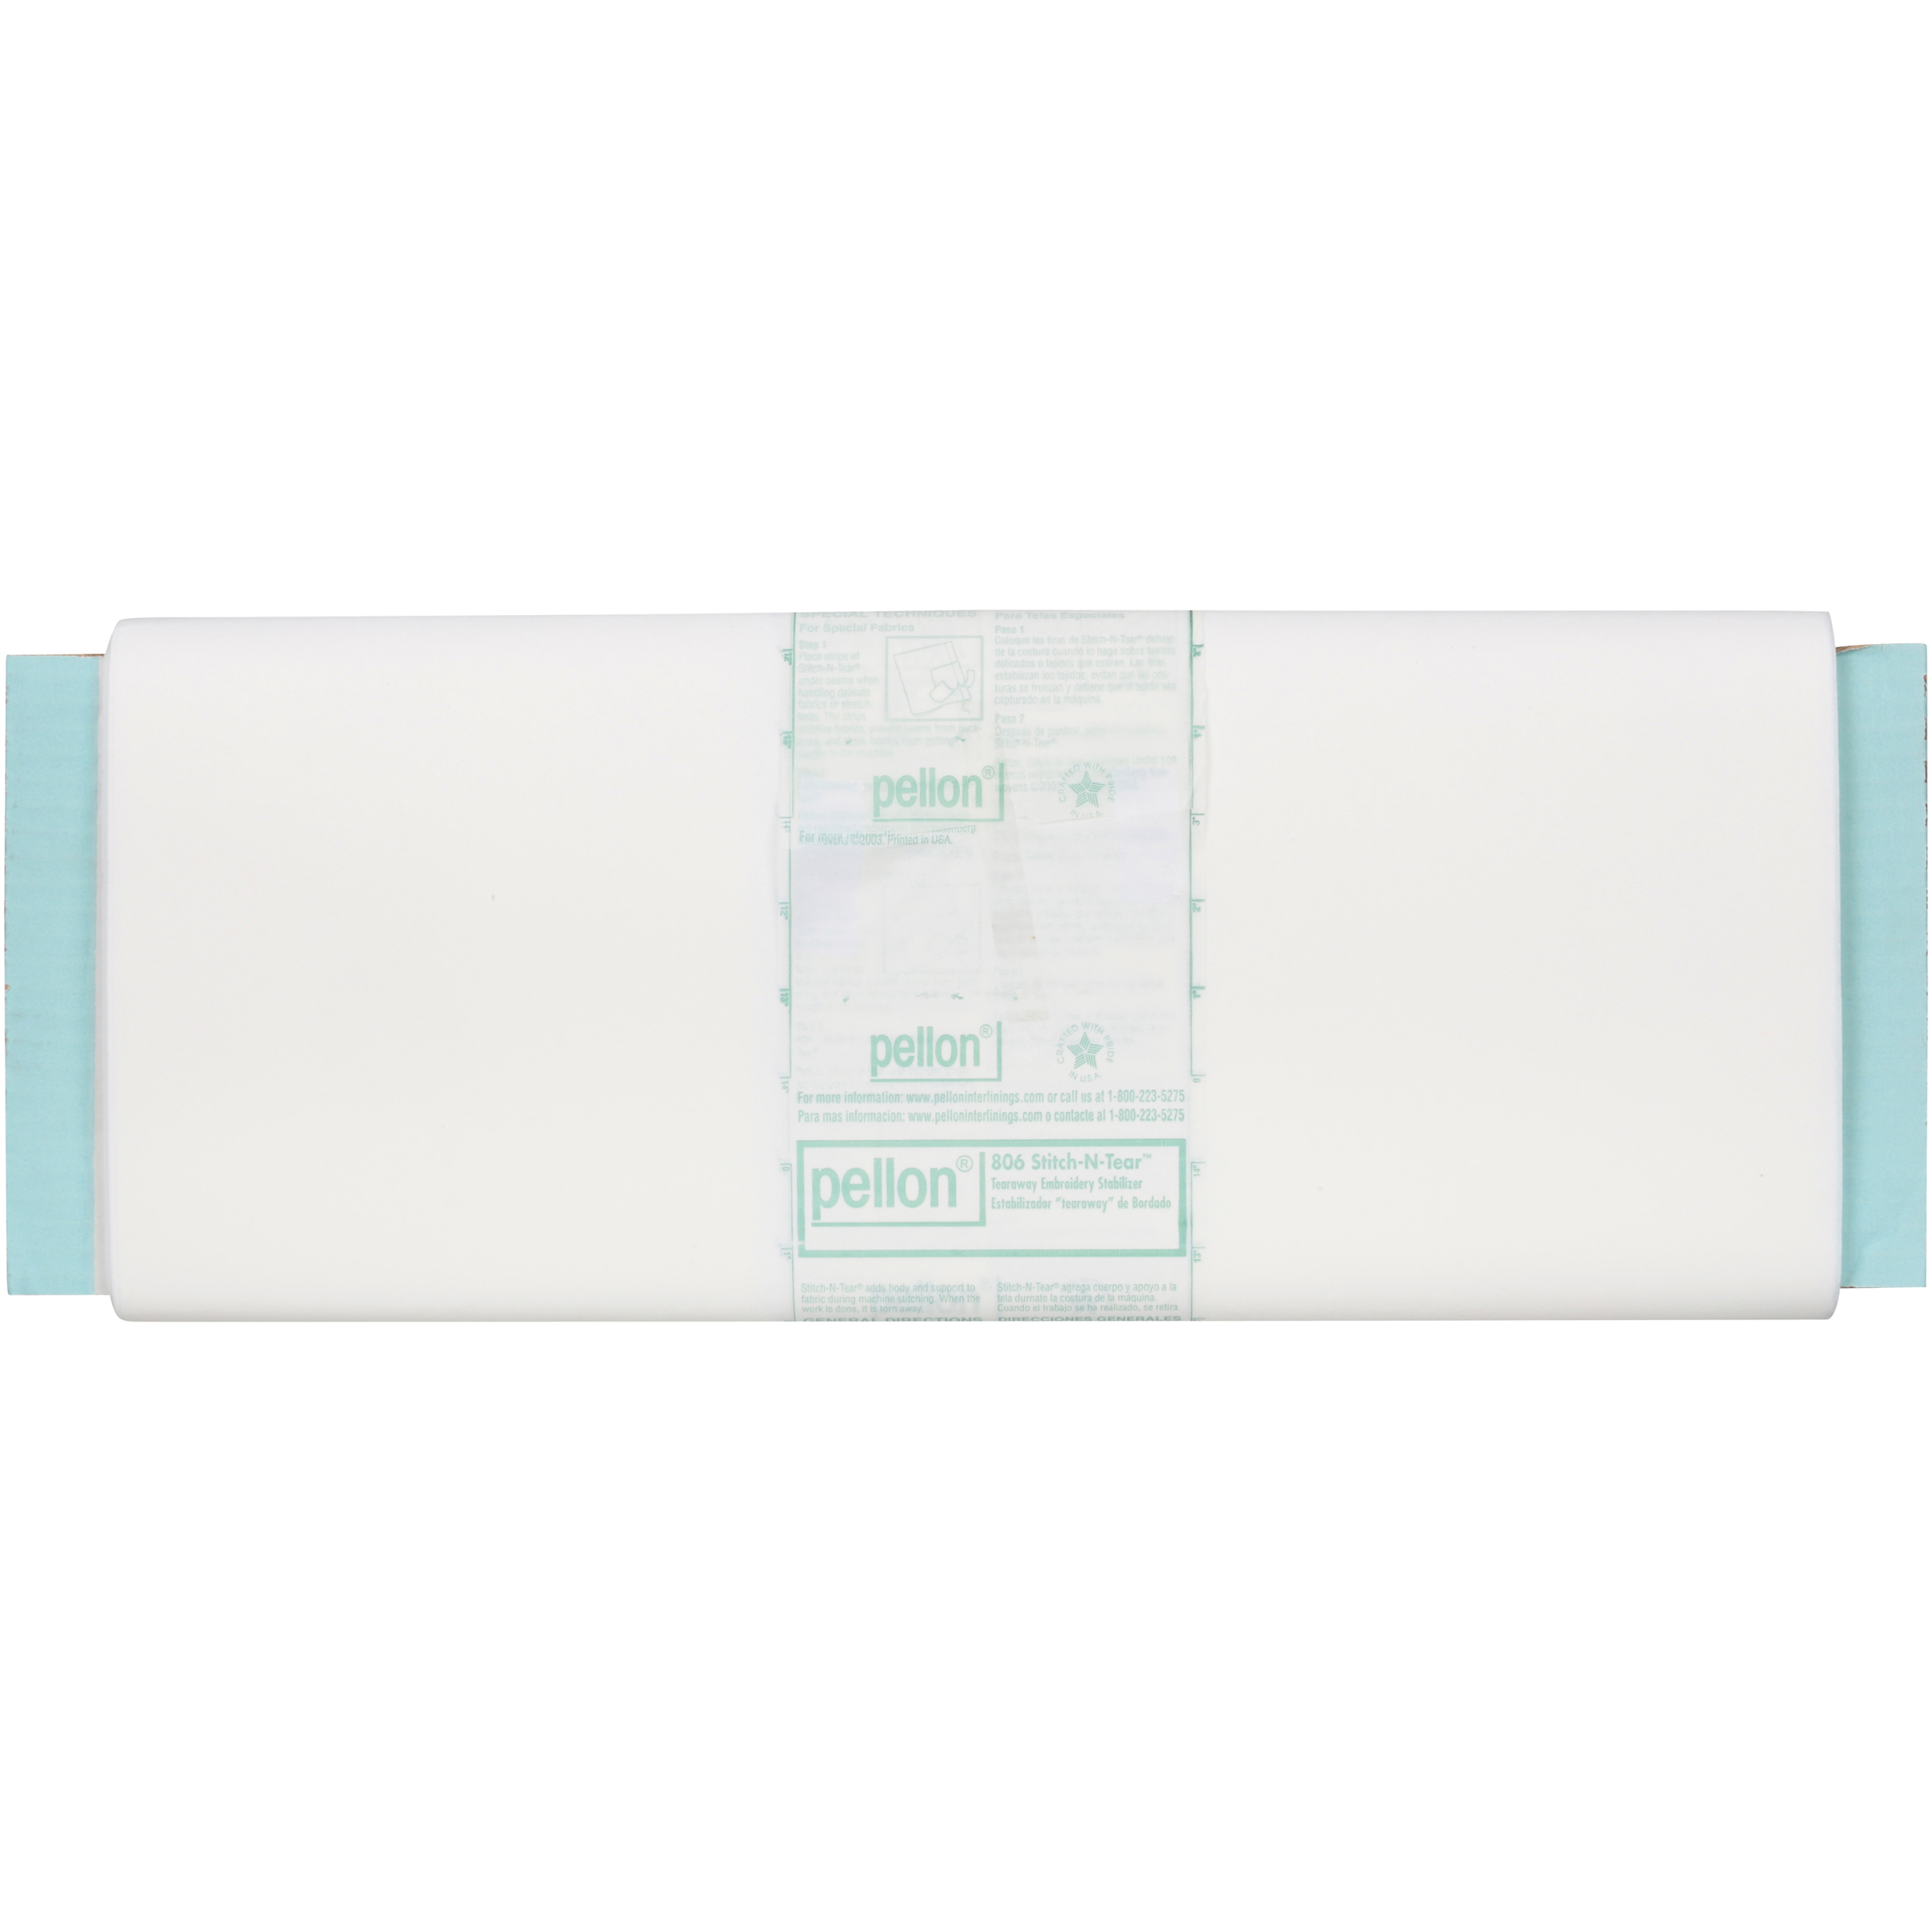 Pellon Stitch-N-Tear Fabric Stabilizer, White 20" x 15 Yards by the Bolt - 1 Pack - image 2 of 5